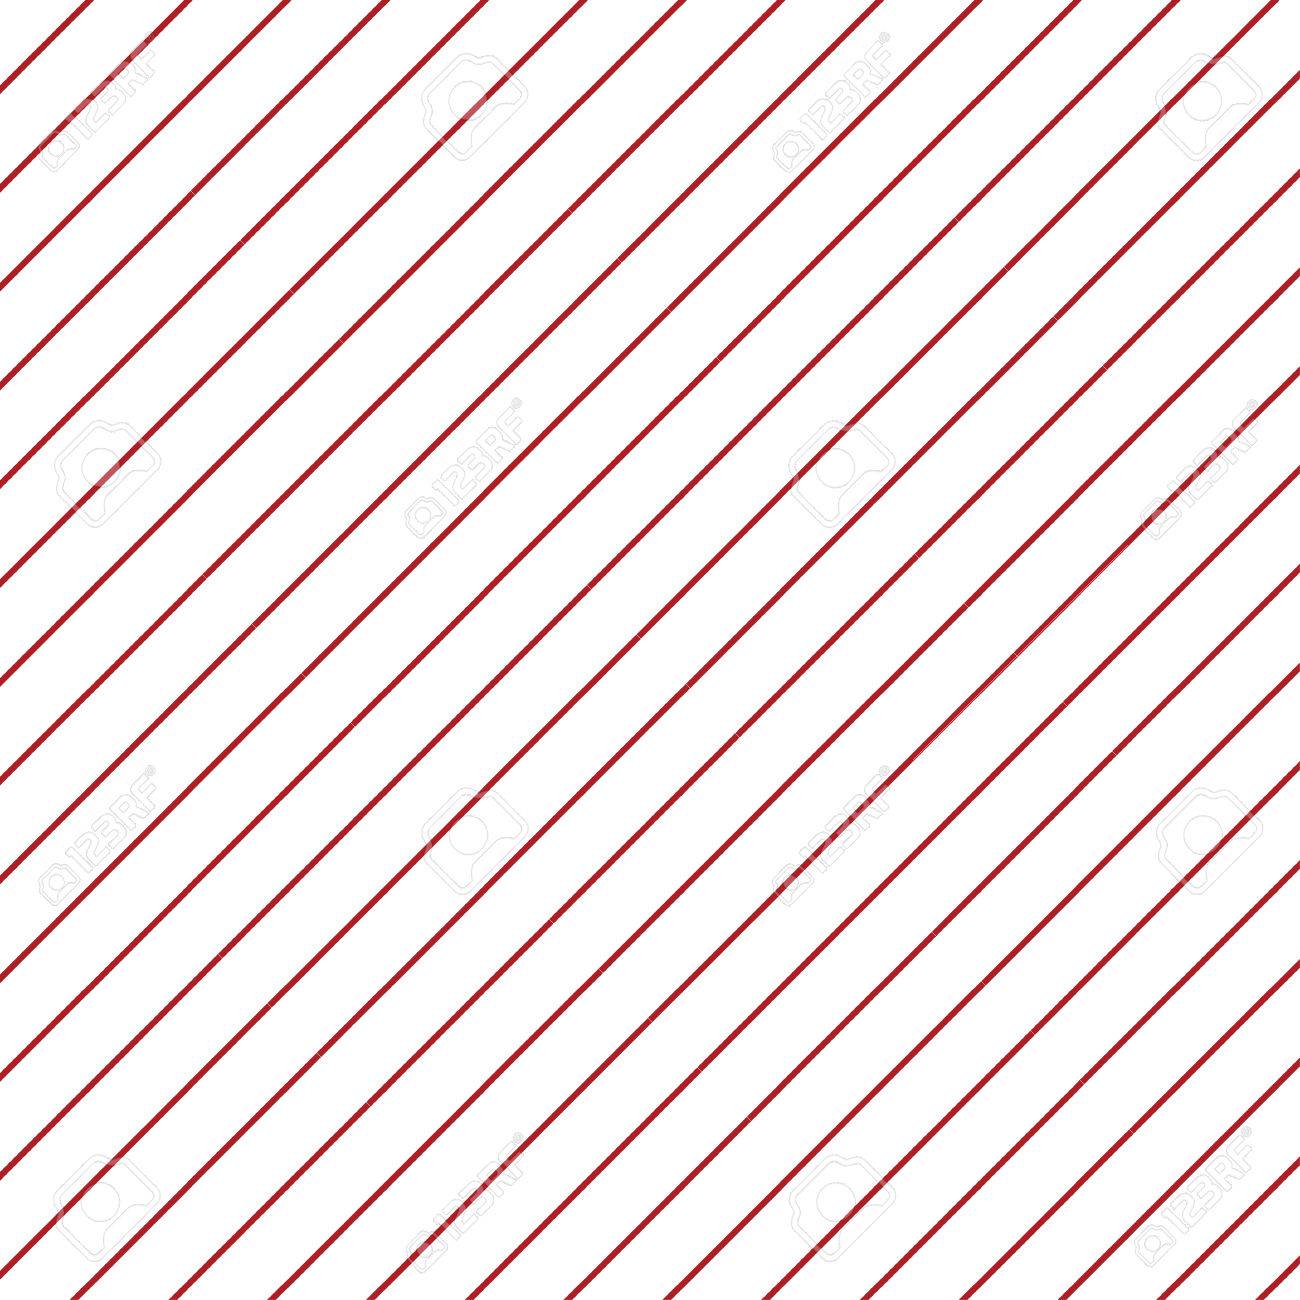 Red Diagonal Lines On White Background Gift Wrapping Paper